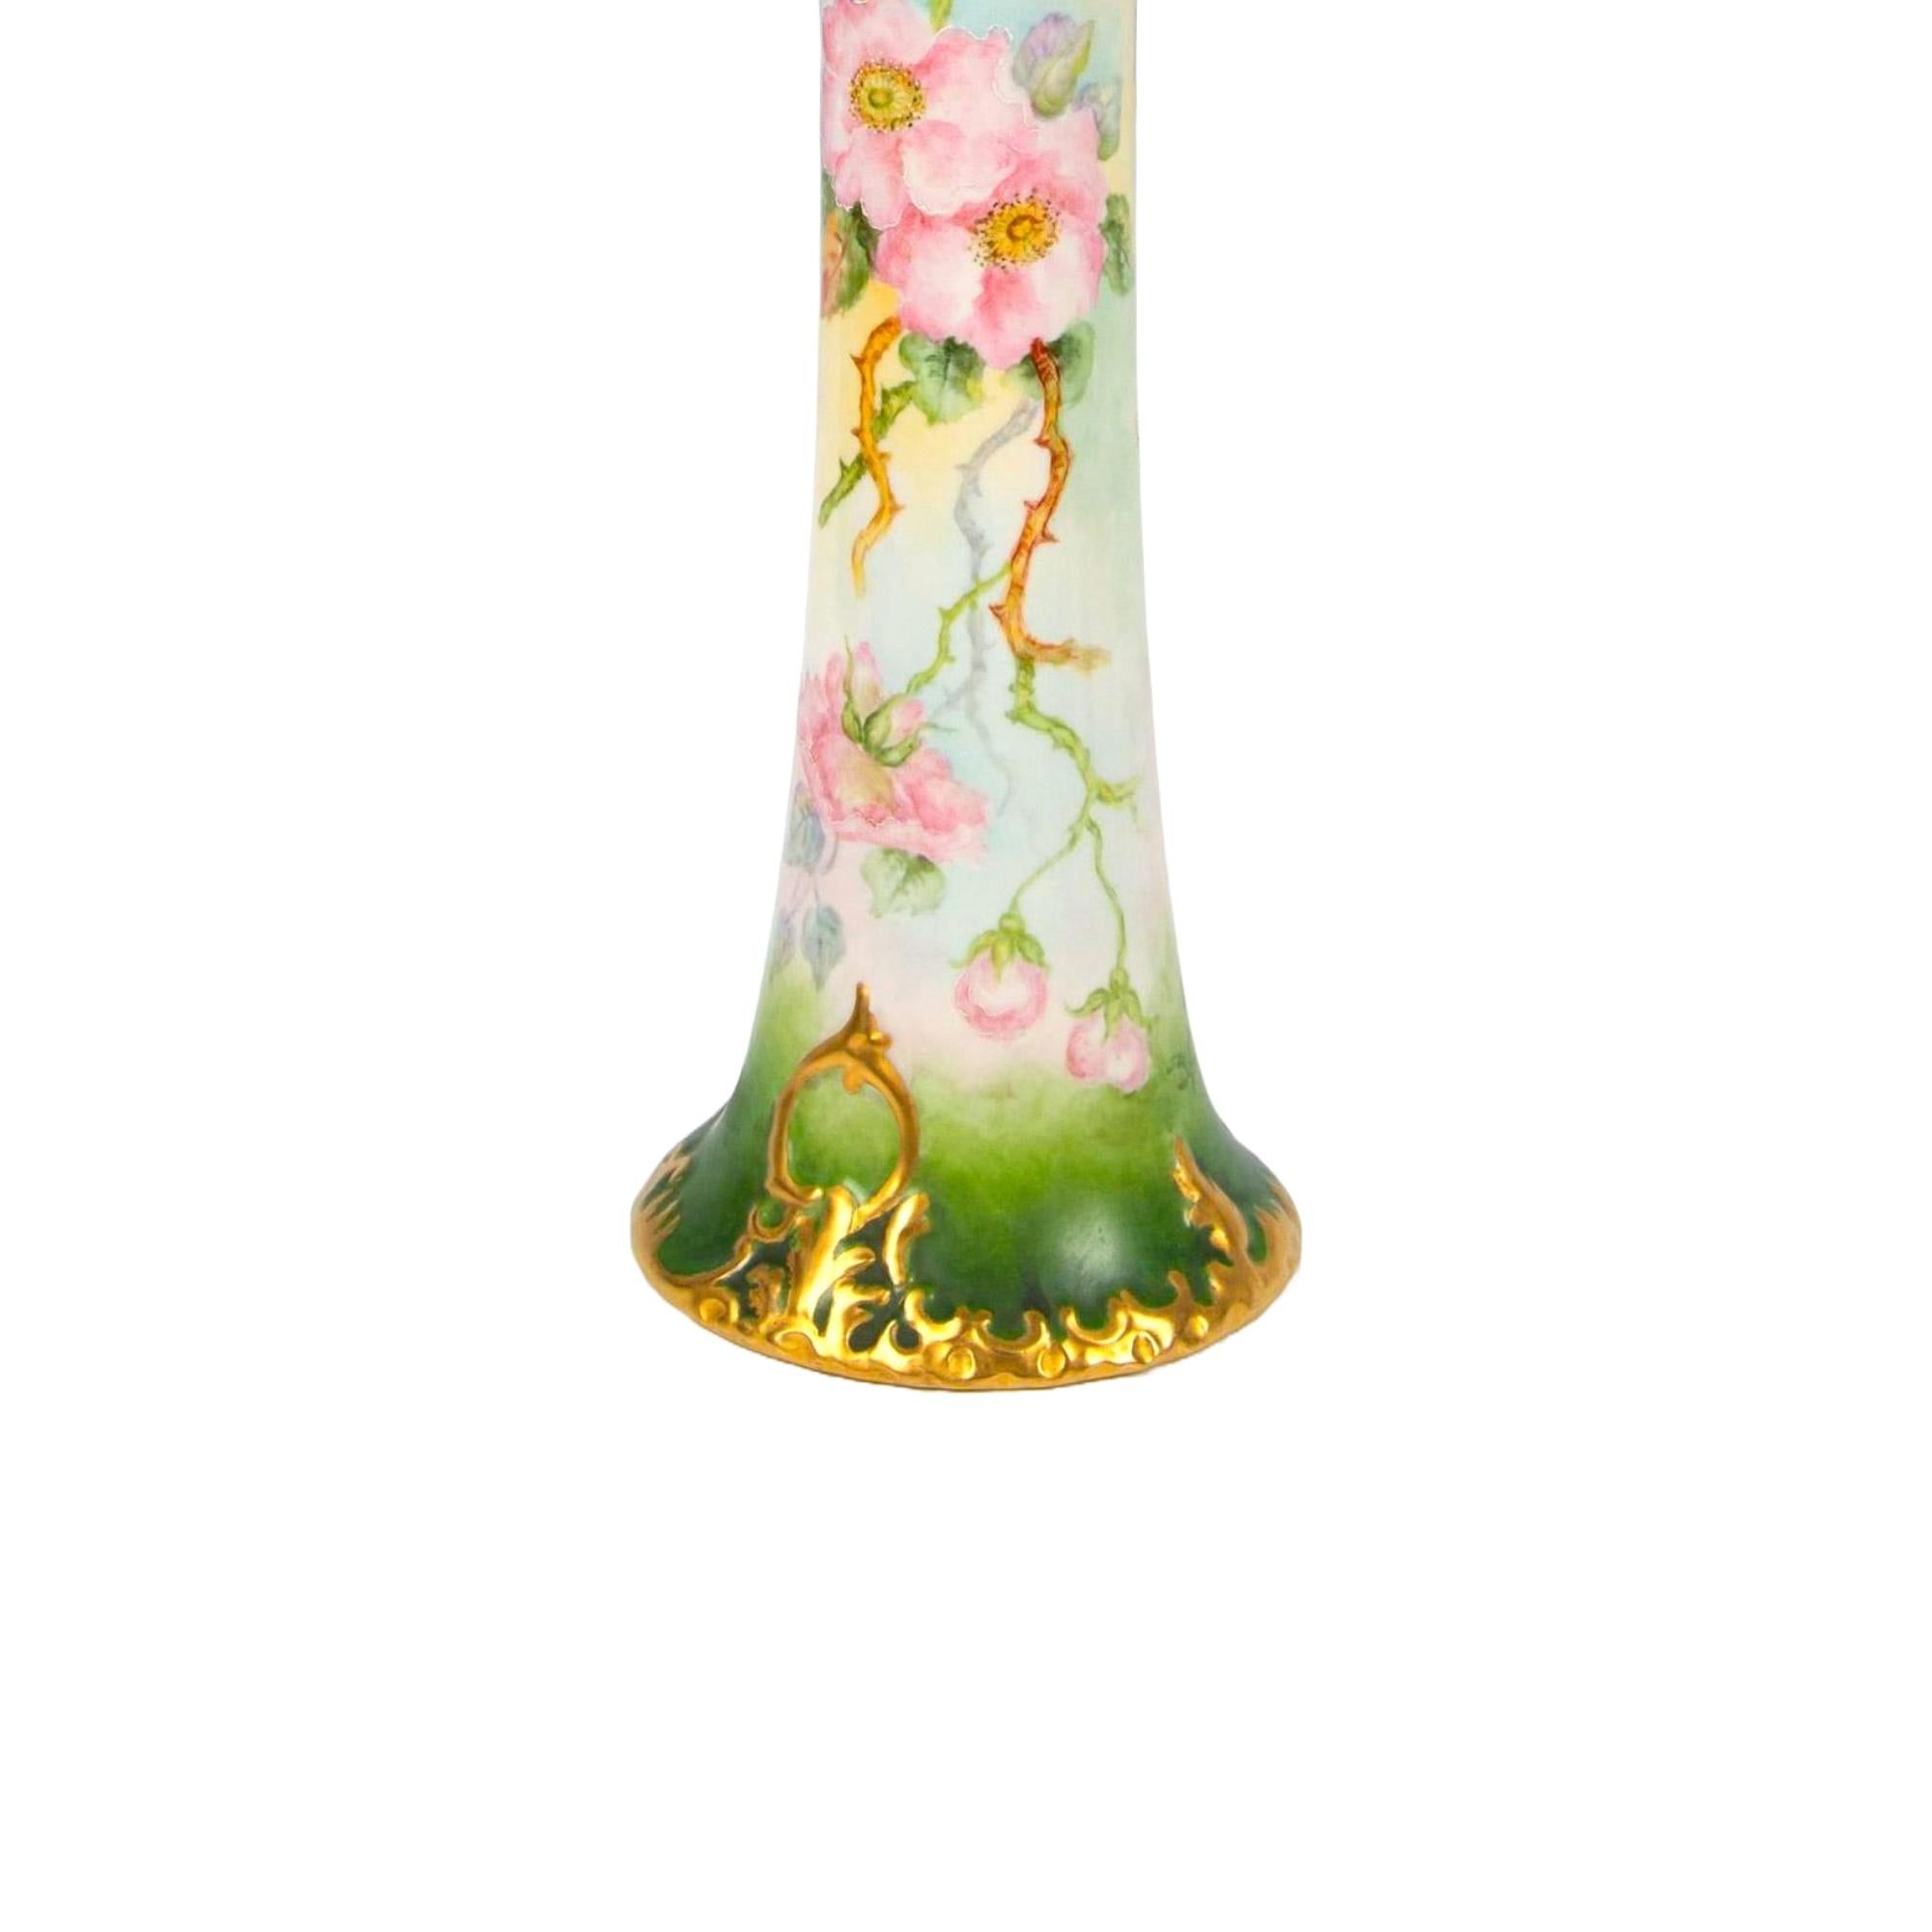 American Antique Hand-painted & Gilt Decorated Tall Porcelain Rose Vase / Belleek Willets For Sale